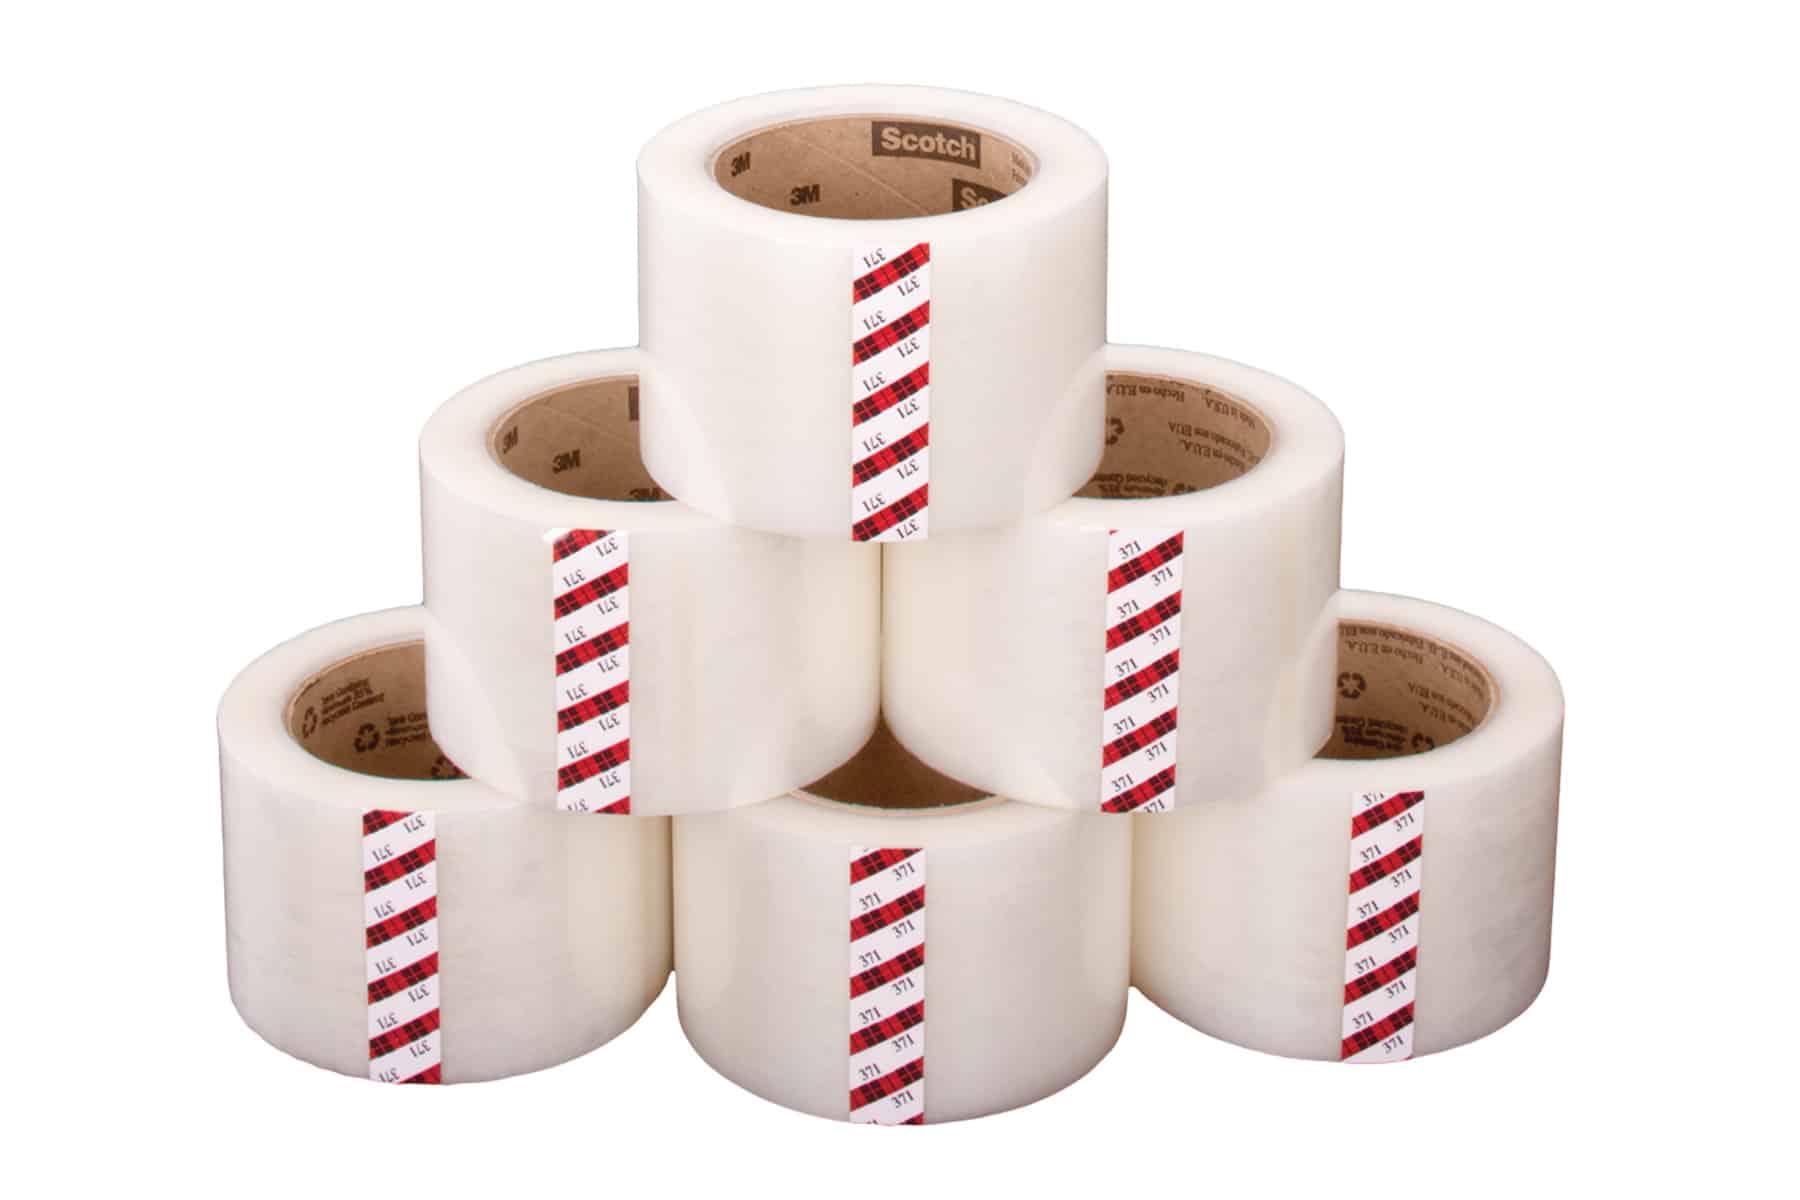 Duct and Cloth Tape